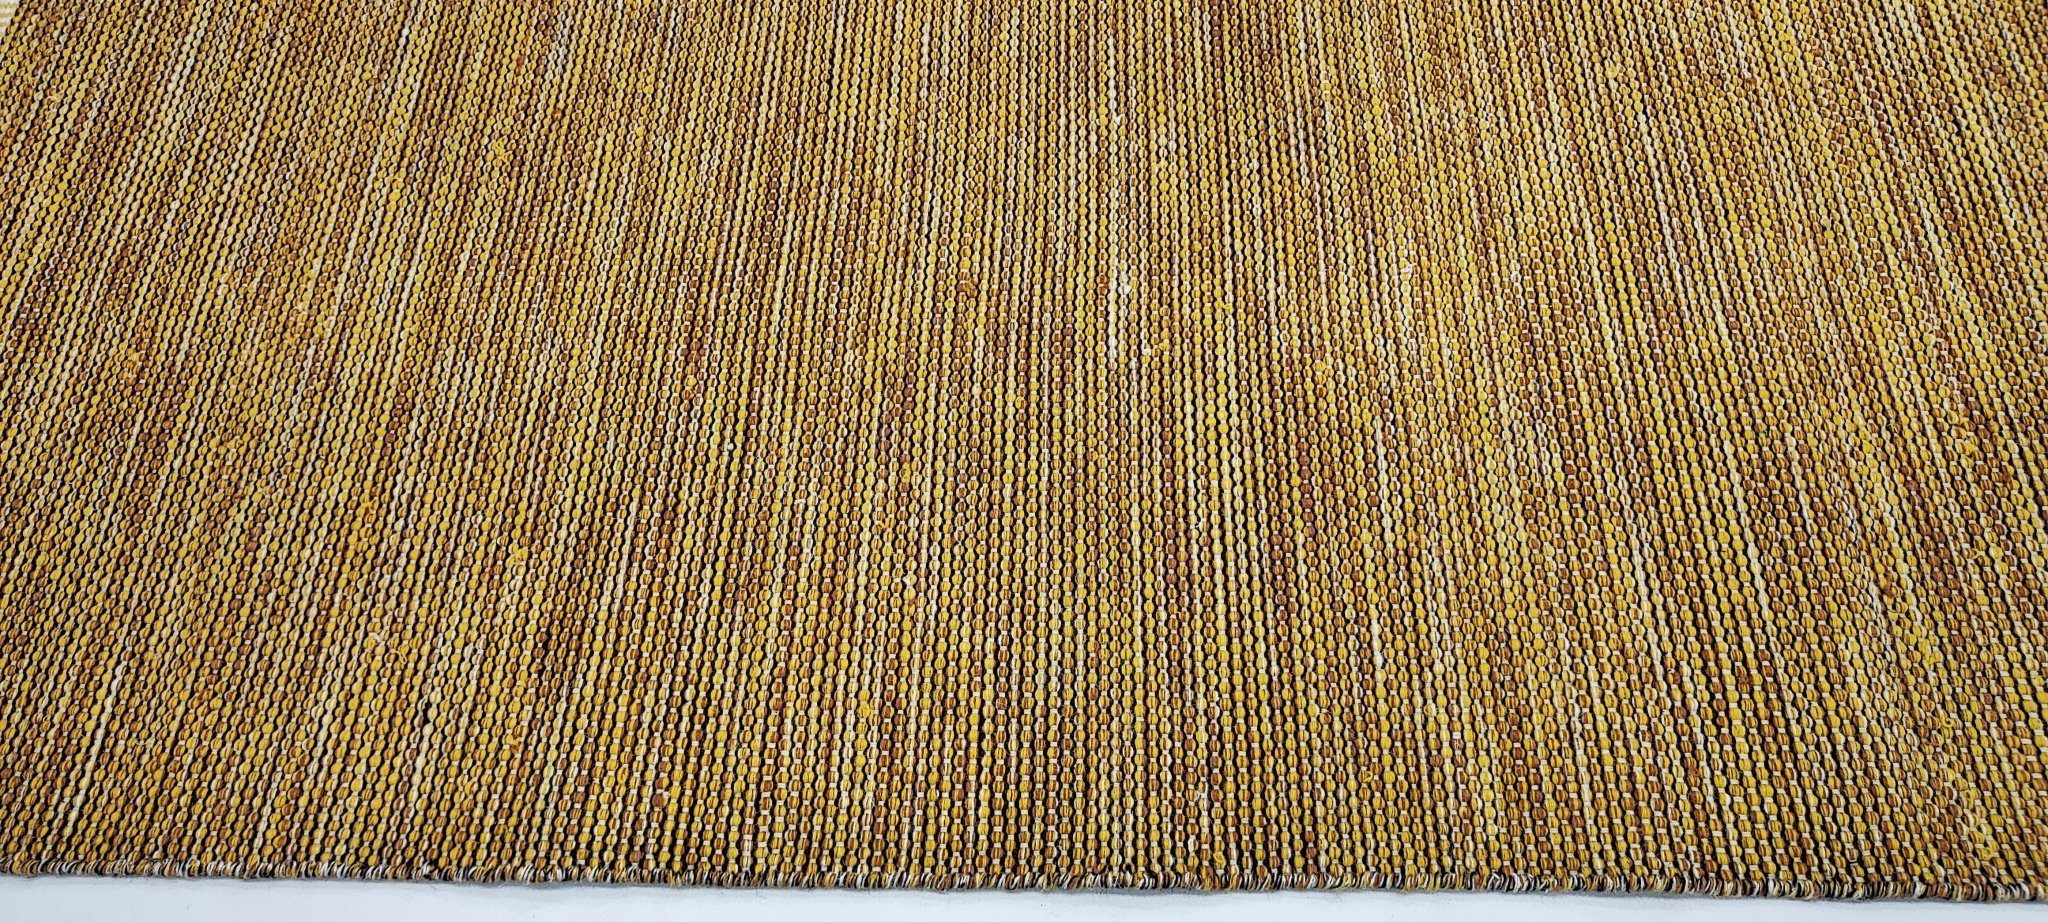 Elks Orleans 5.6x7.6 Handwoven Gold Textured Durrie | Banana Manor Rug Factory Outlet